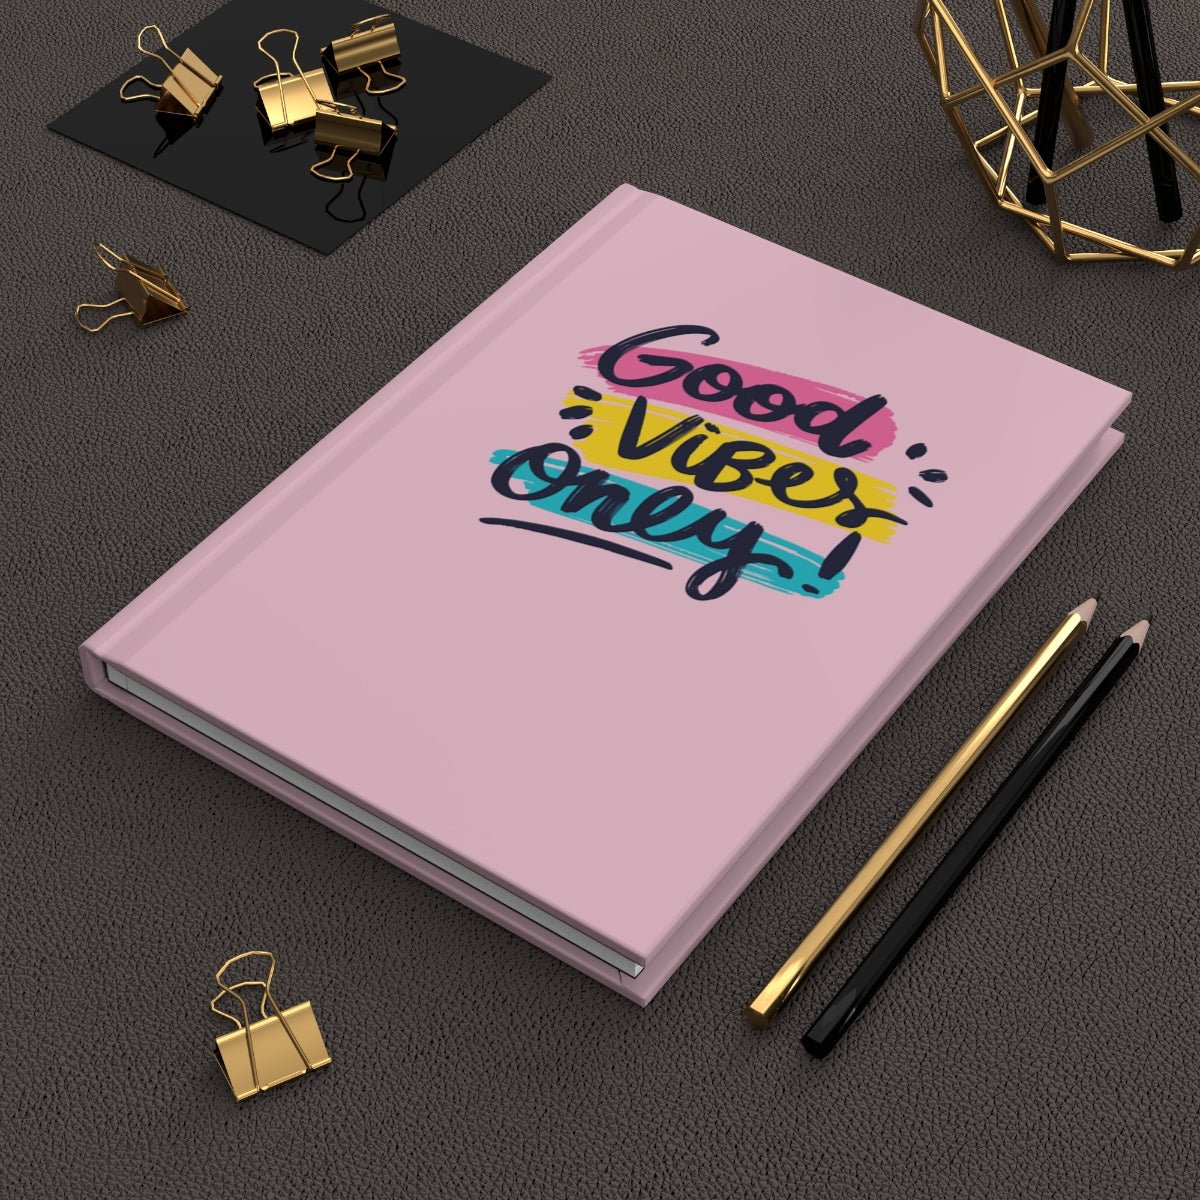 Good Vibes Only Hardcover Matte Journal - The Kindness Cause